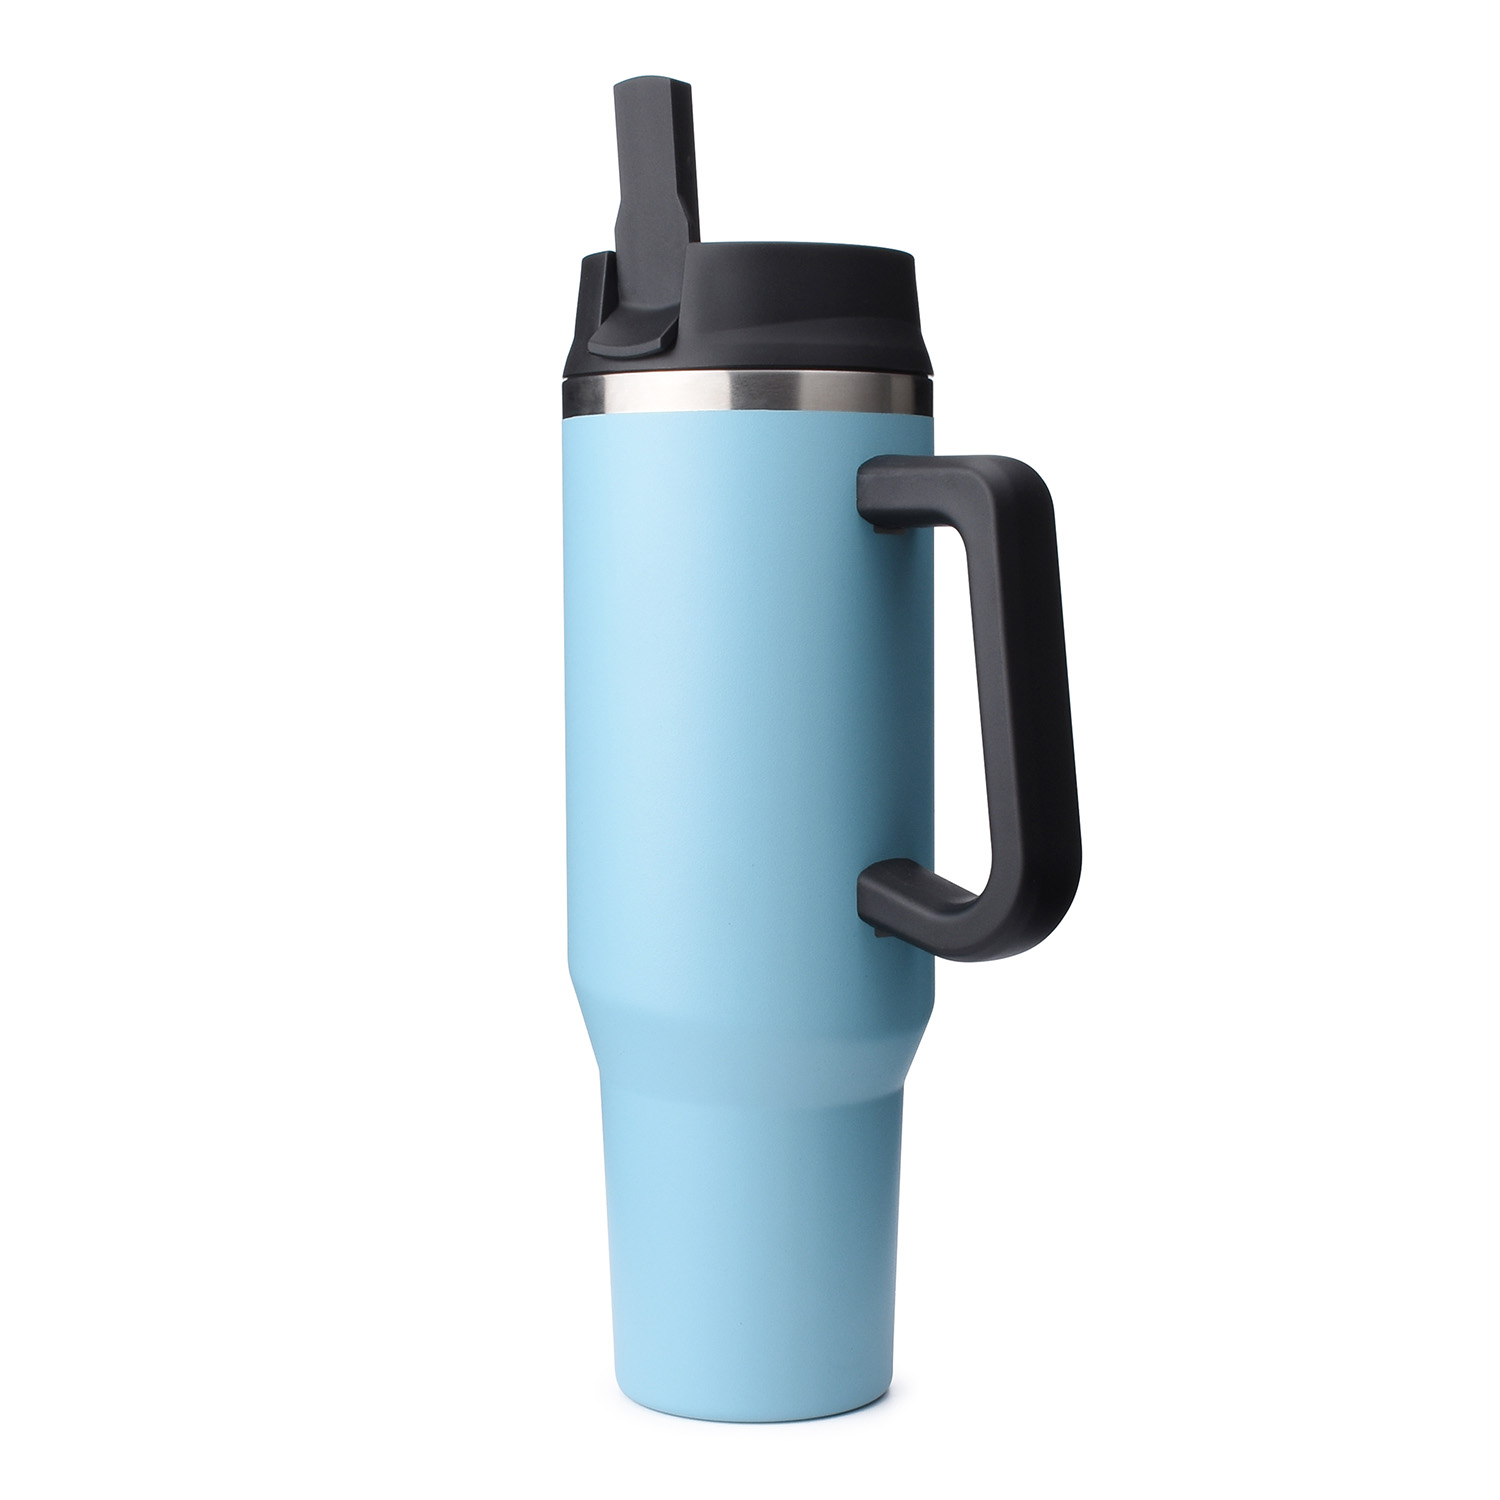 https://www.waterbottle.tech/wp-content/uploads/2021/10/bottle-tumbler-with-handle-40-oz-fit-cup-holder-s214000-2.jpg